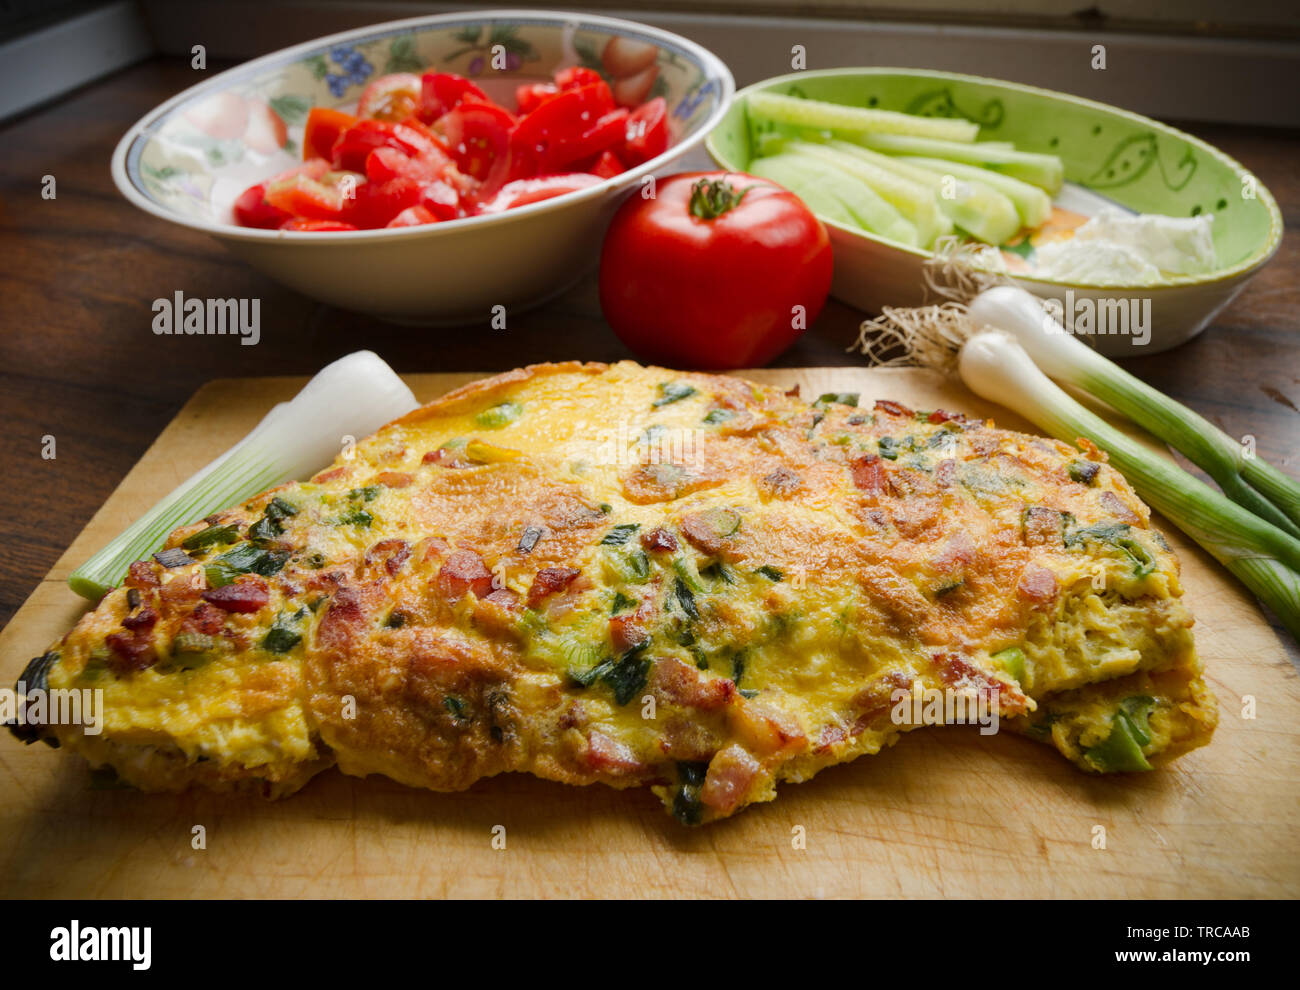 Delicious egg omlette with spring onion and bakon, served on a wooden plank and decorated with tomato salad, one tomato, cucumber, white cheese and sp Stock Photo